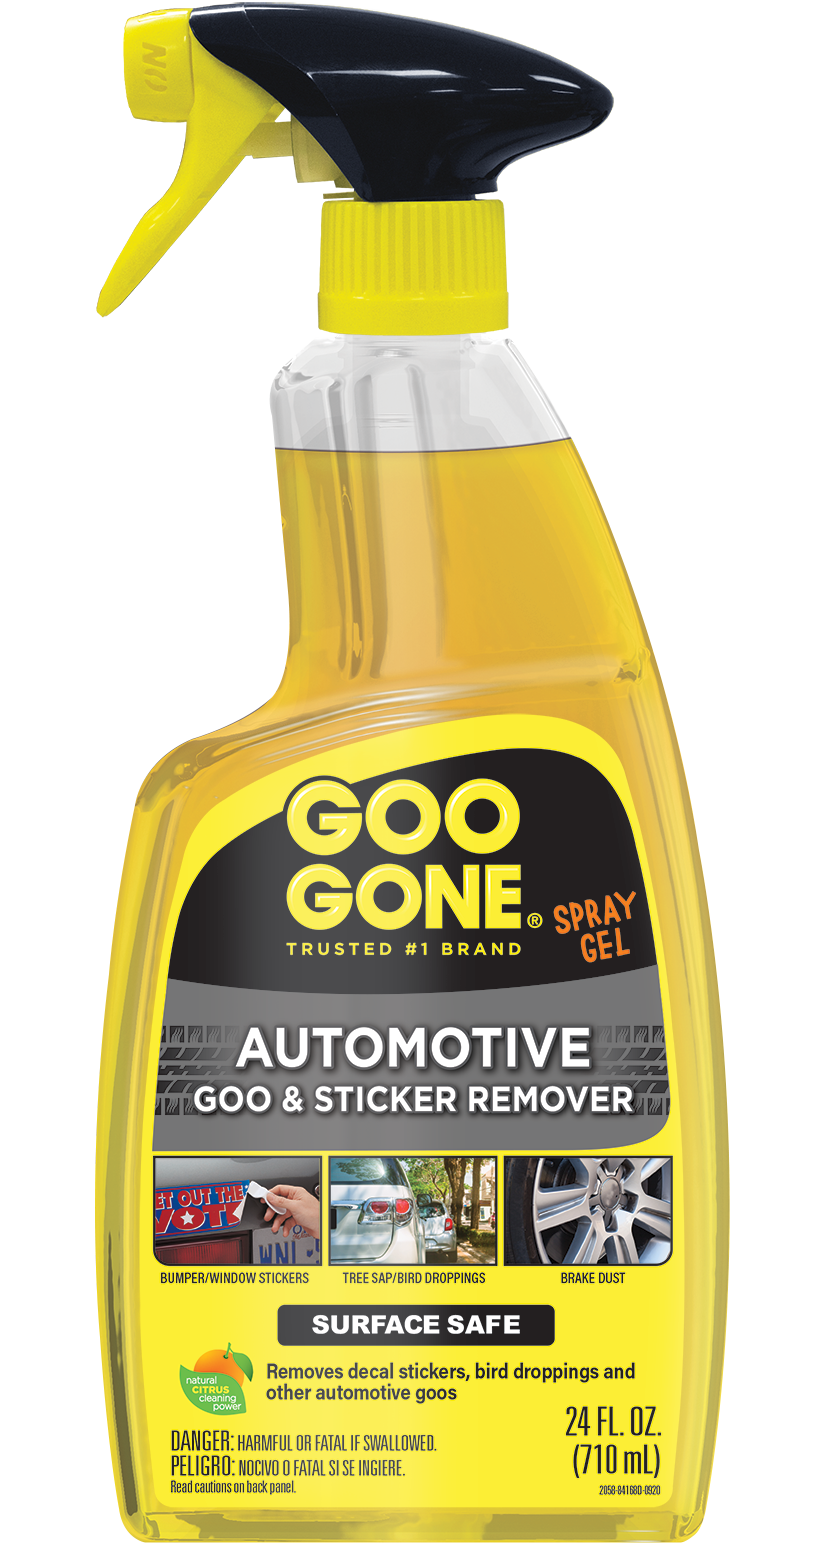 Goo Gone Automotive Adhesive Spray Gel Cleaner for Tires, Rims, Stickers, Bugs, Tar & Sap - 24 oz - image 1 of 8